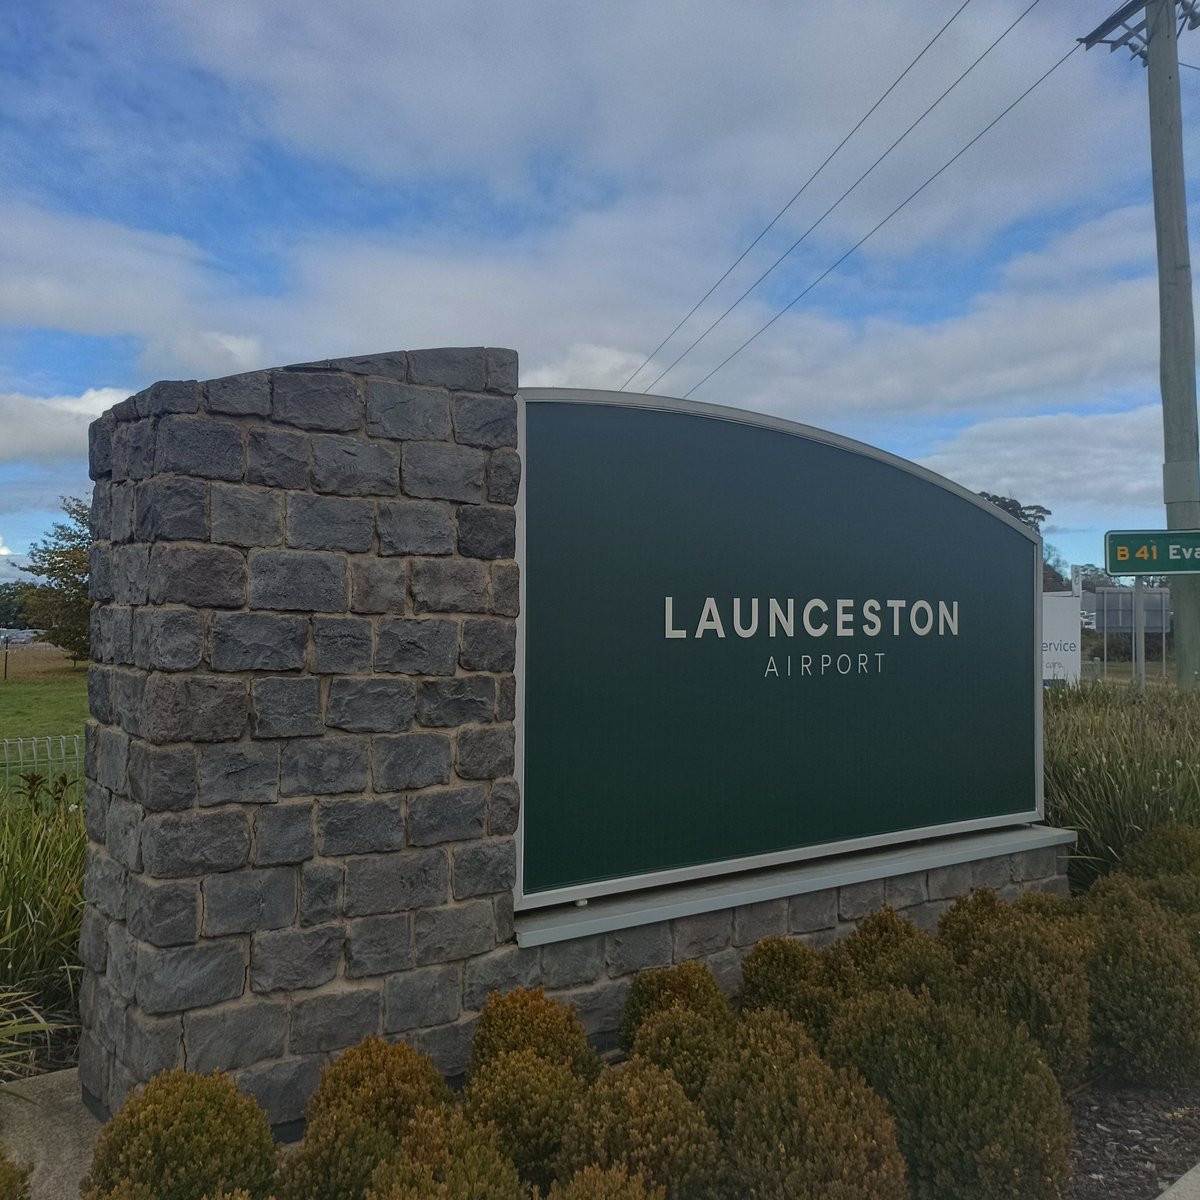 Thanks whoever is responsible for there now being zero public transport to/from Launceston Airport after the shuttle bus stopped operating.
Had to take a bus to Breadalbane and walk the remaining few km's. #politas